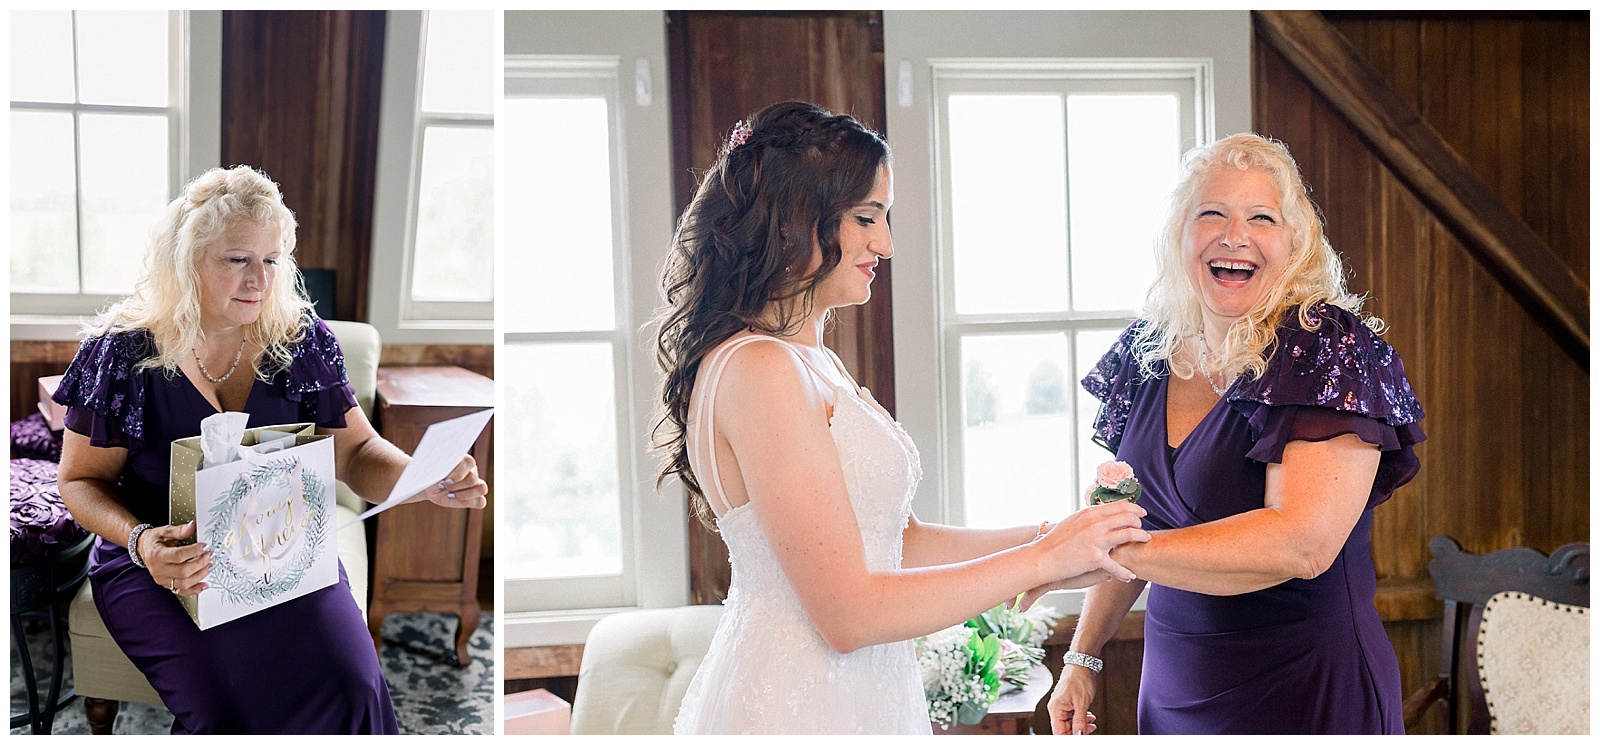 mother of the bride opens a thoughtful gift bracelet from her daughter at their wedding at lakefield weddings, a modern barn wedding venue 